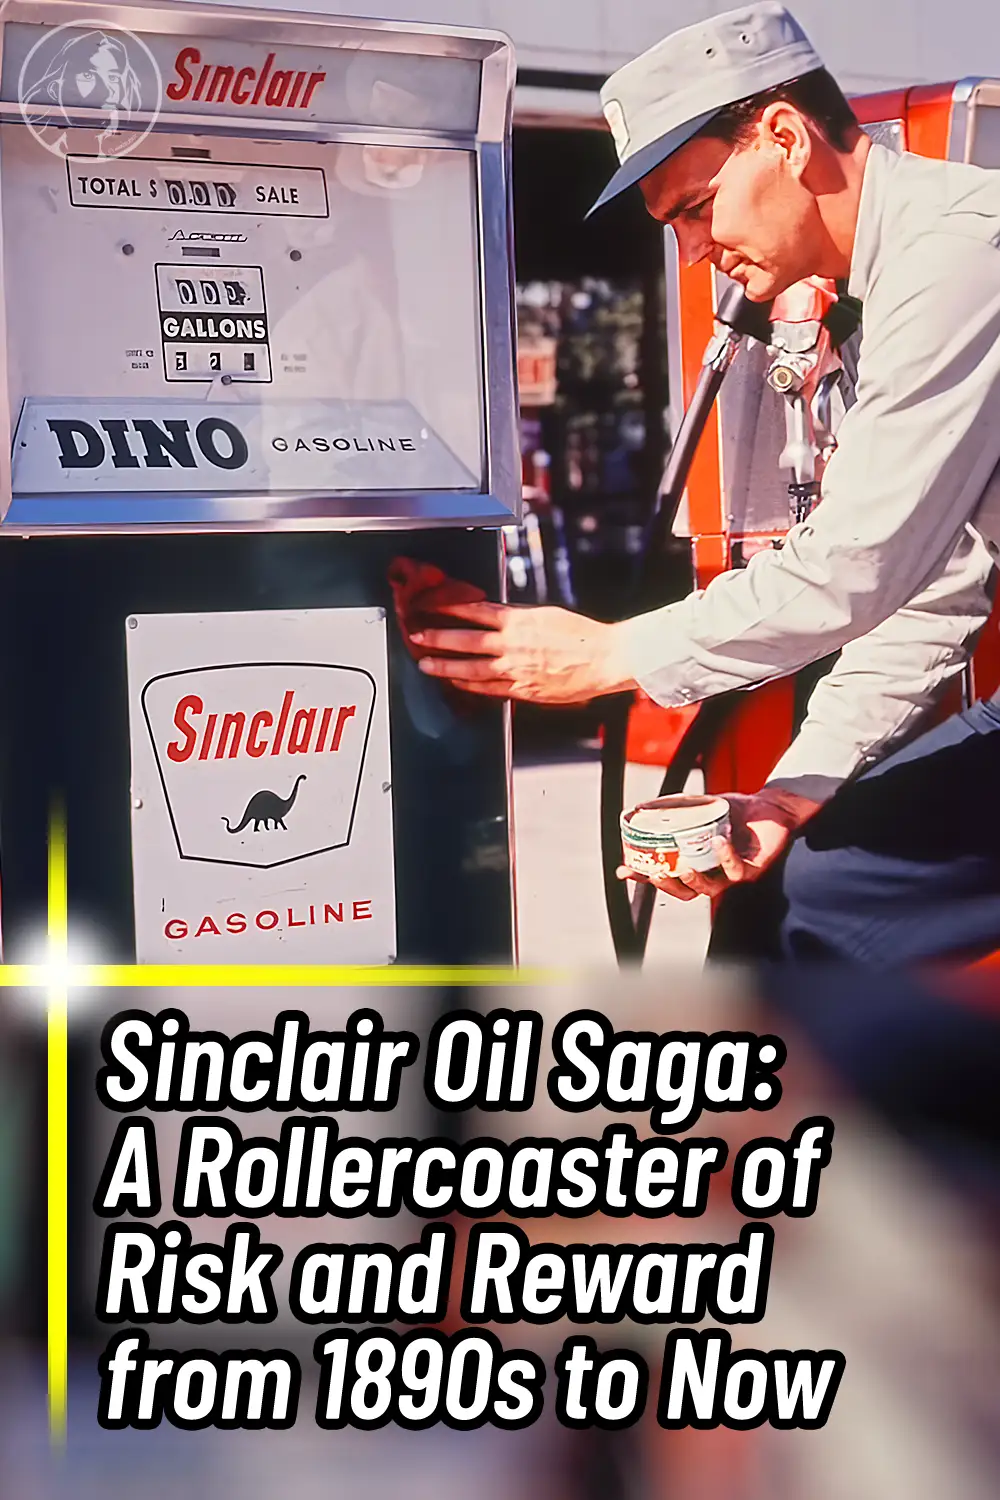 Sinclair Oil Saga: A Rollercoaster of Risk and Reward from 1890s to Now